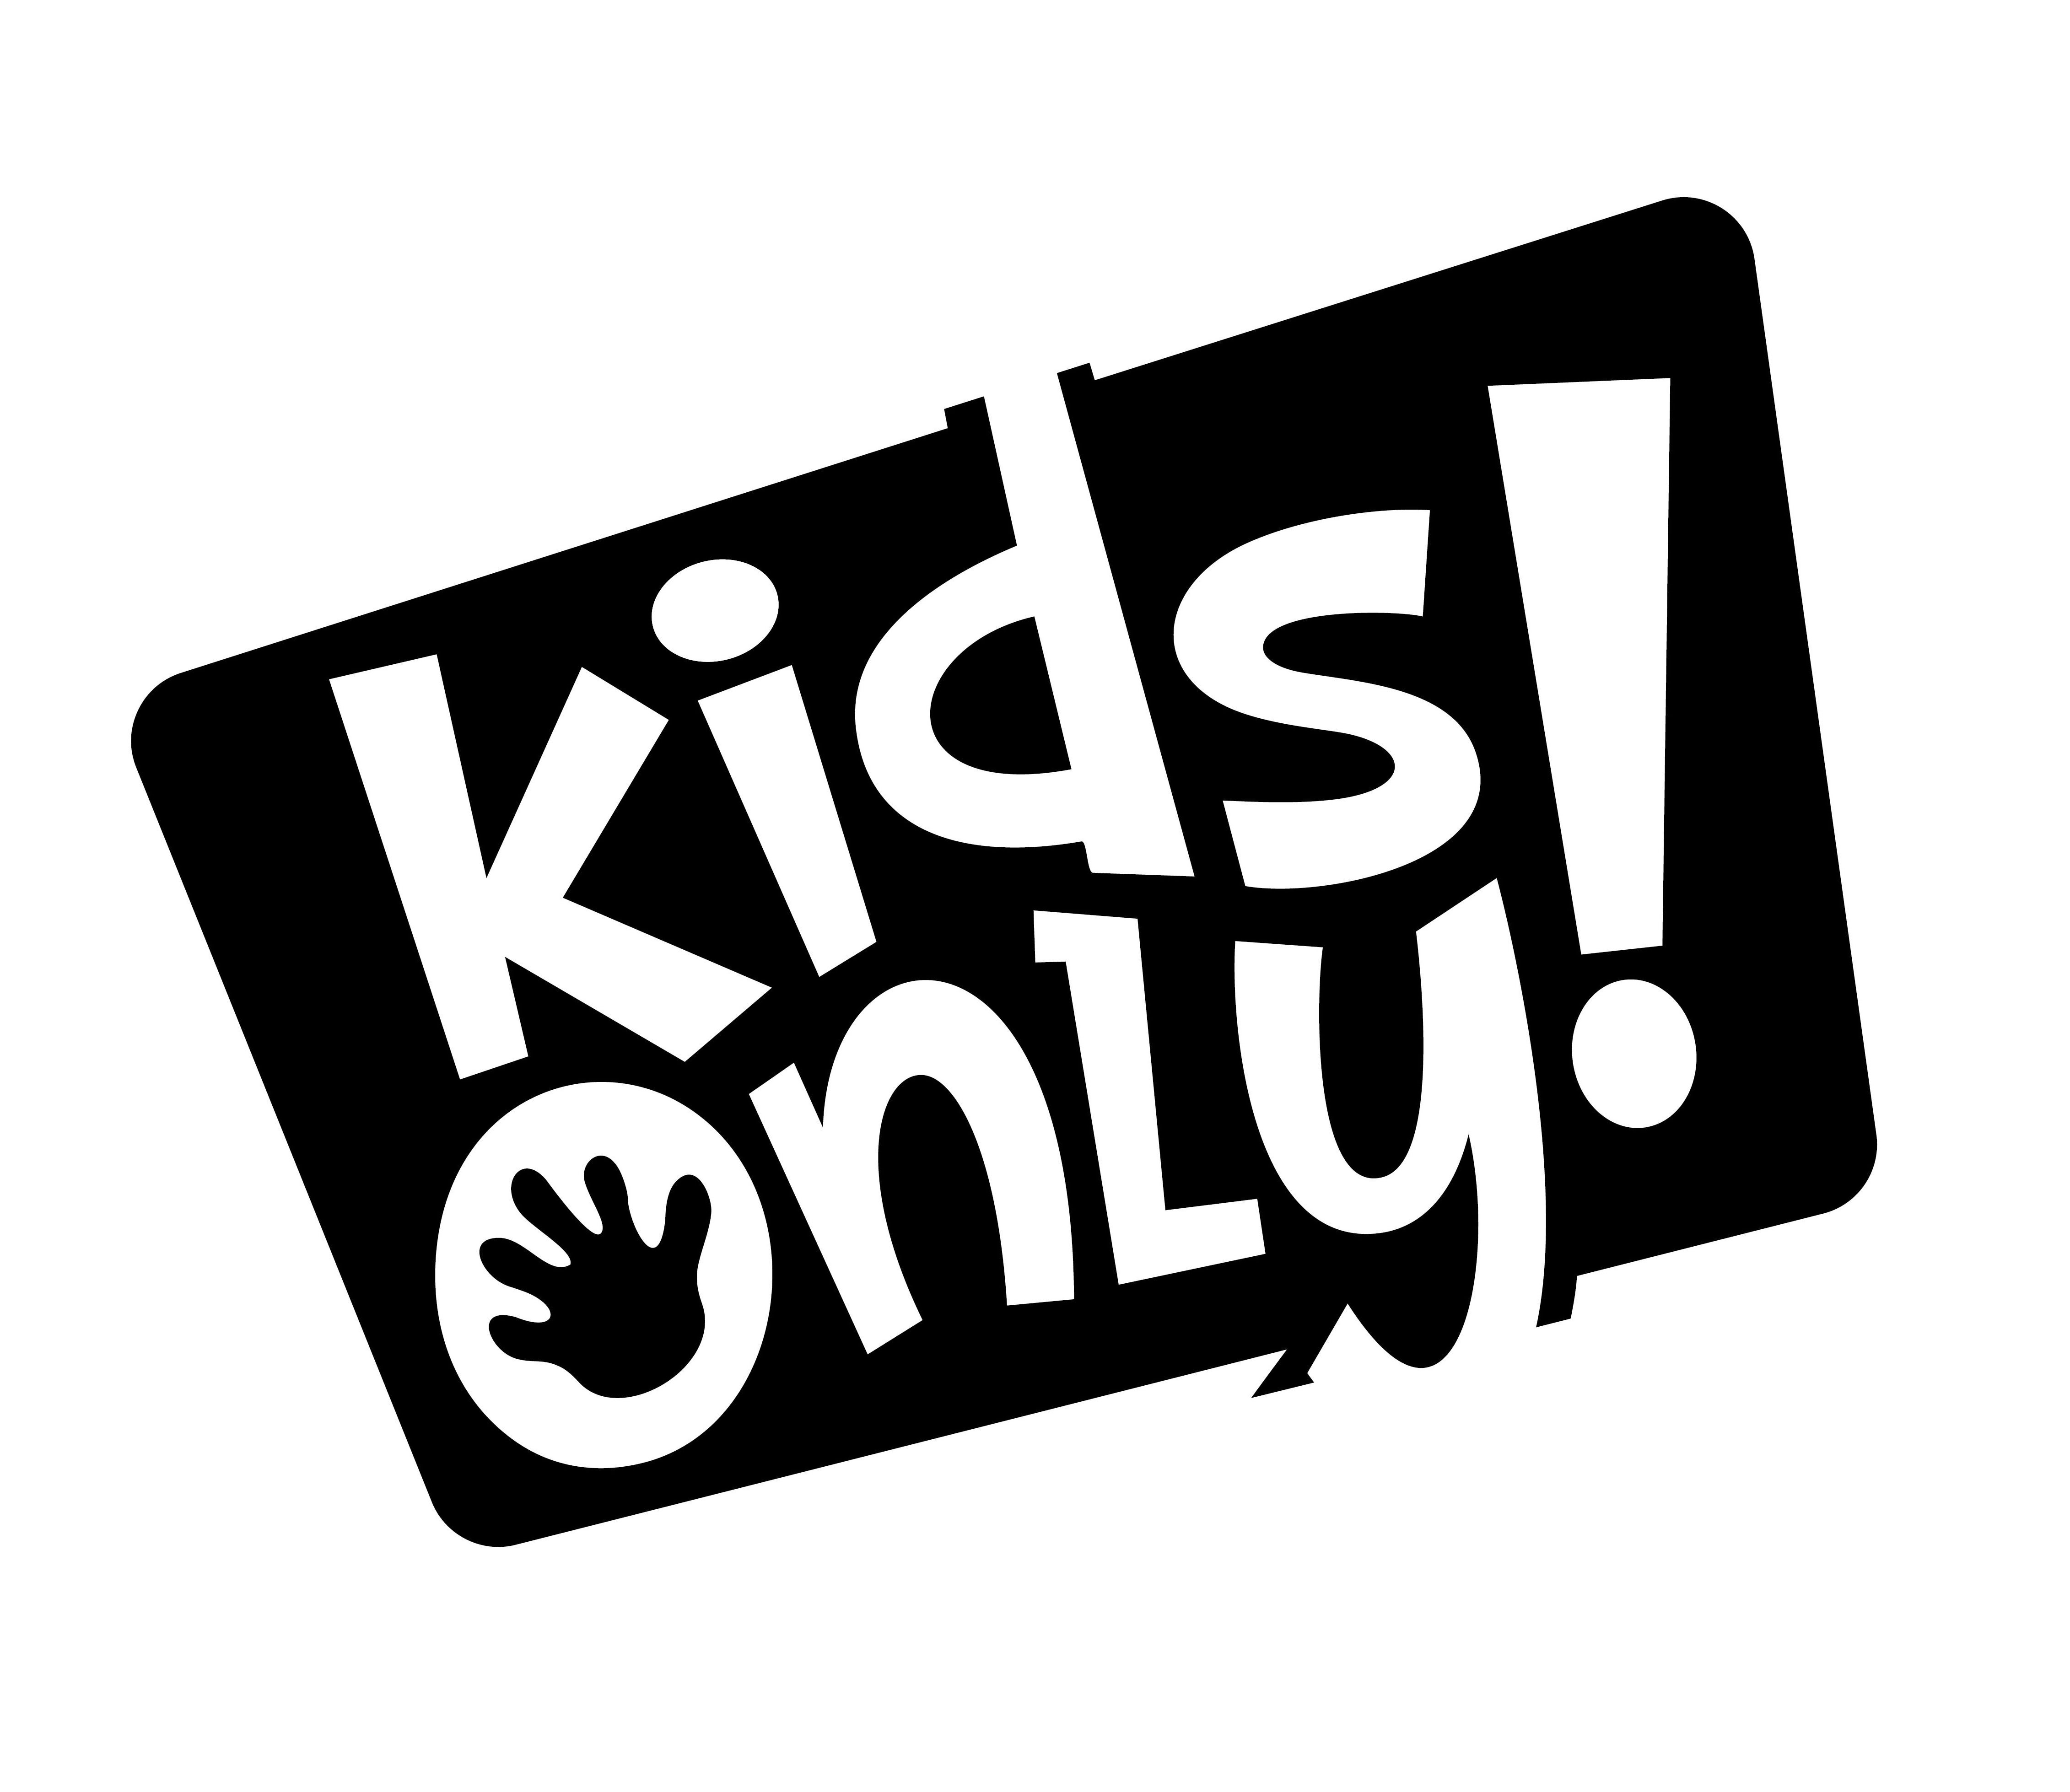 KIDS ONLY!